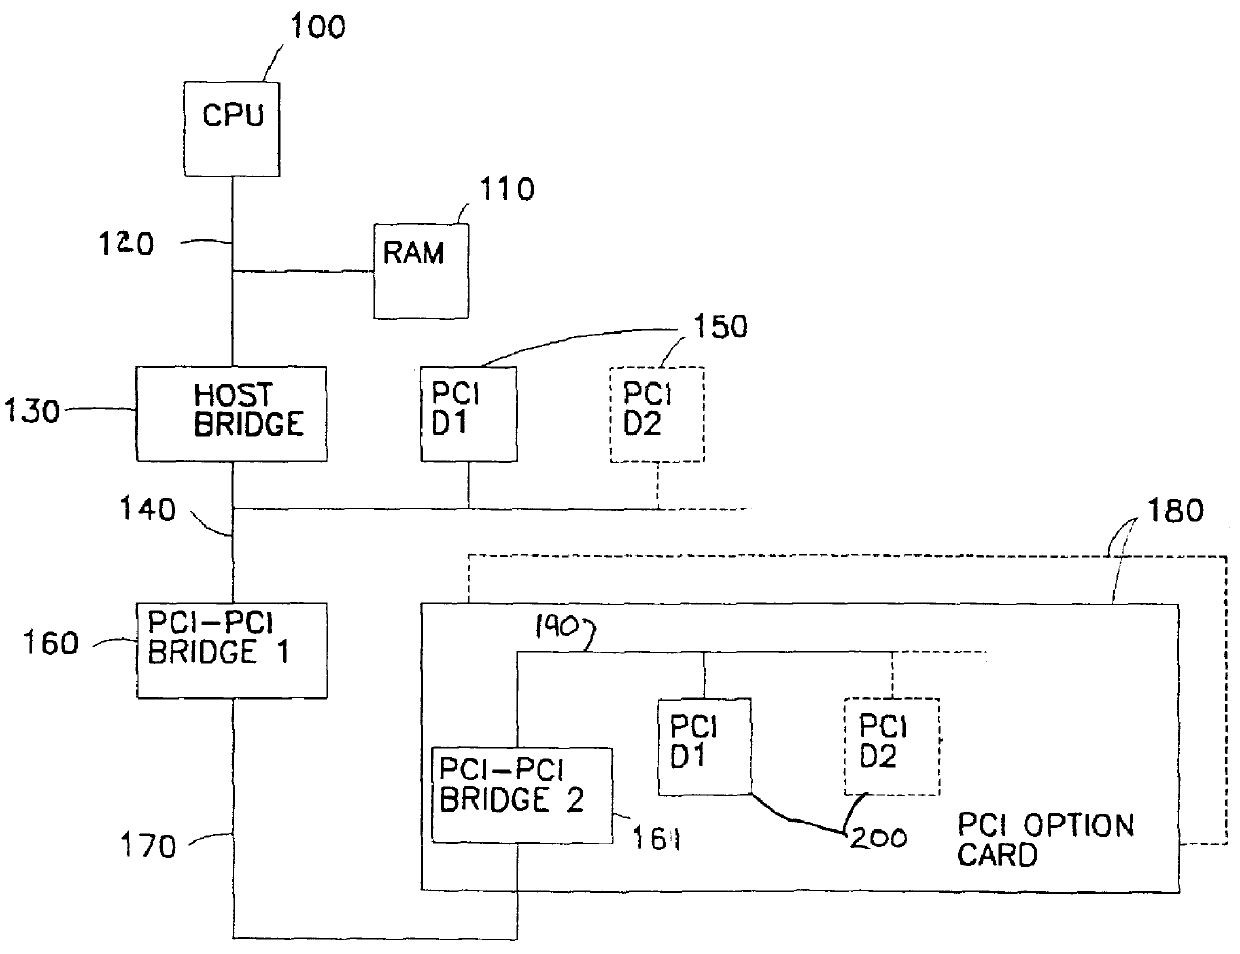 PCI-to-PCI bridges with a timer register for storing a delayed transaction latency